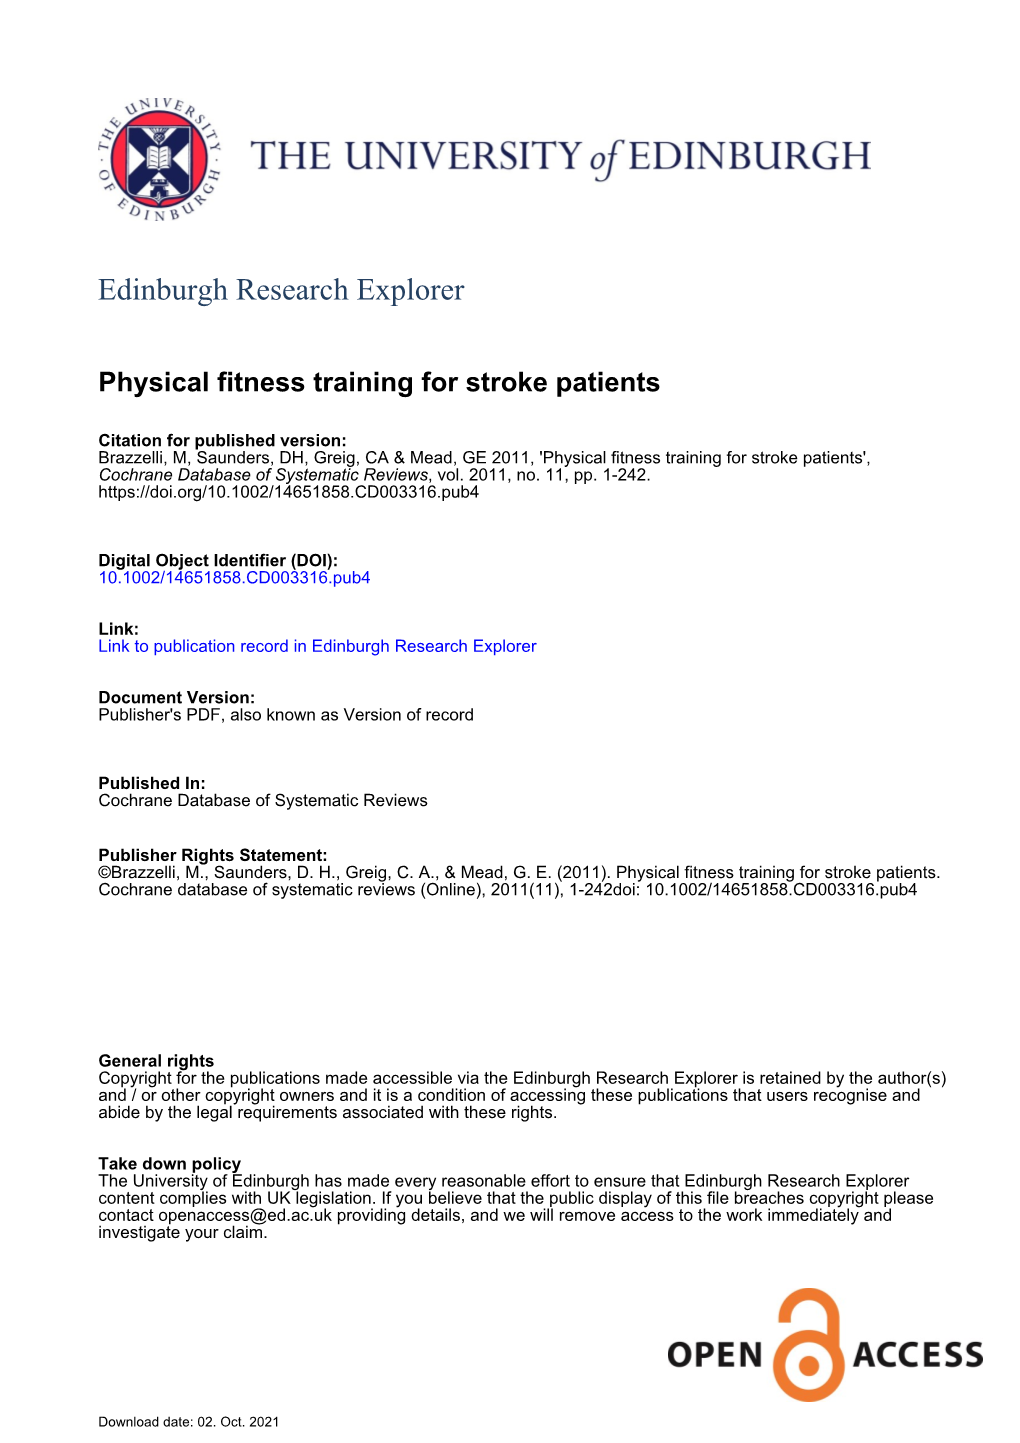 Physical Fitness Training for Stroke Patients